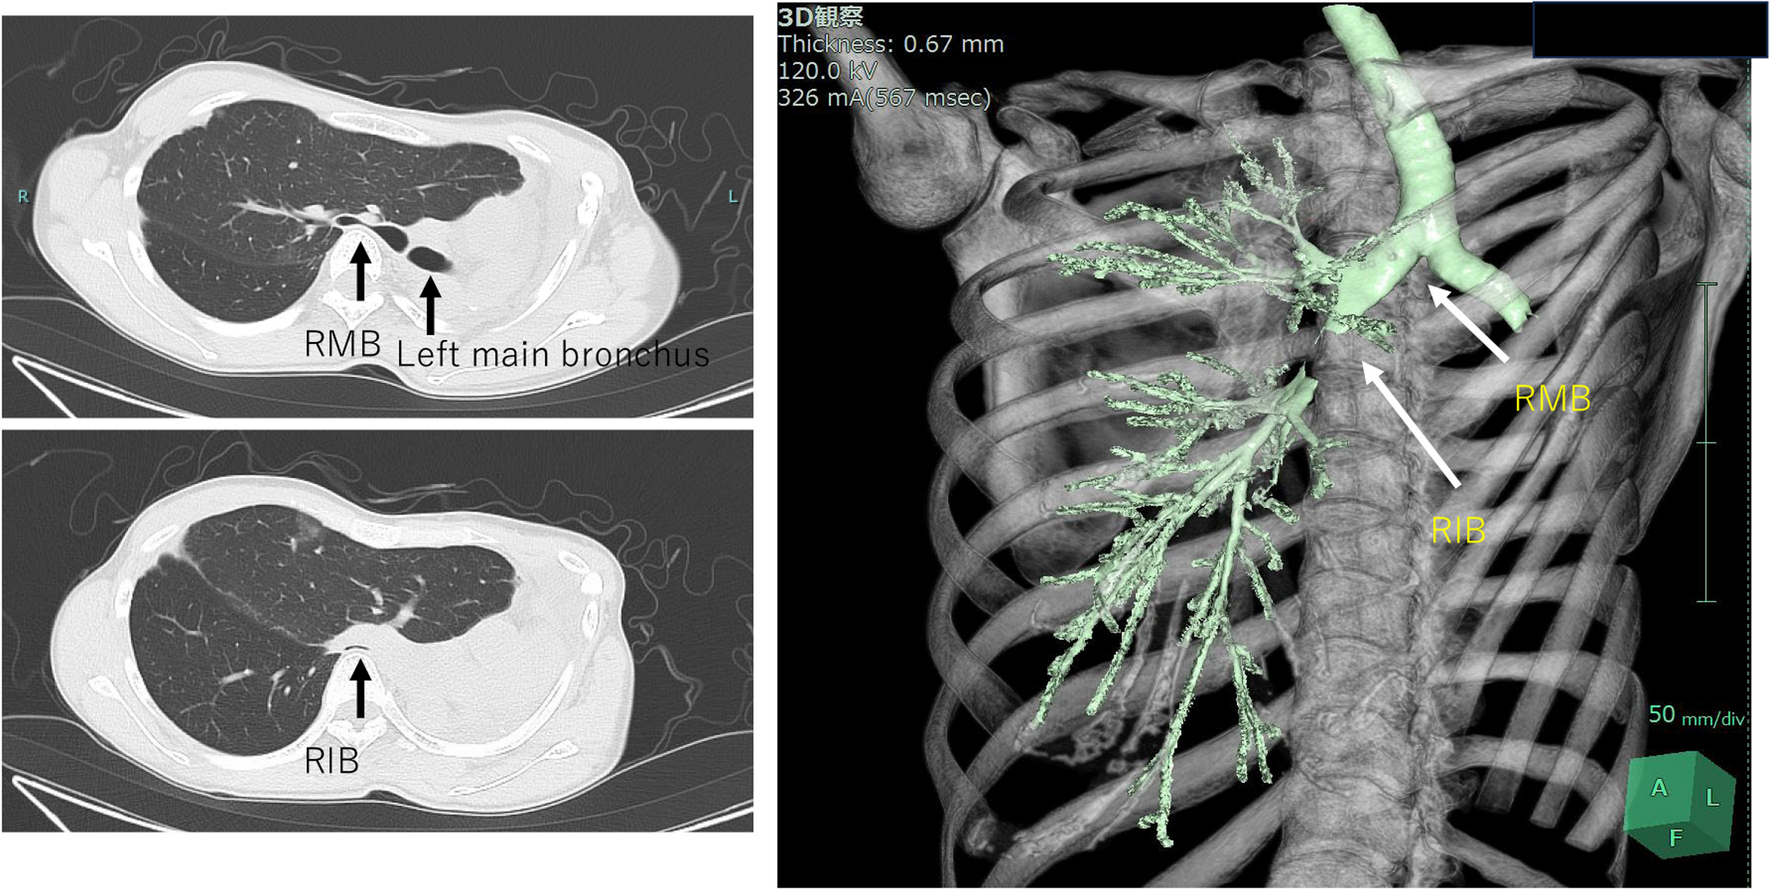 SF6 is a useful expander for post-pneumonectomy syndrome in the long-term course: a case report